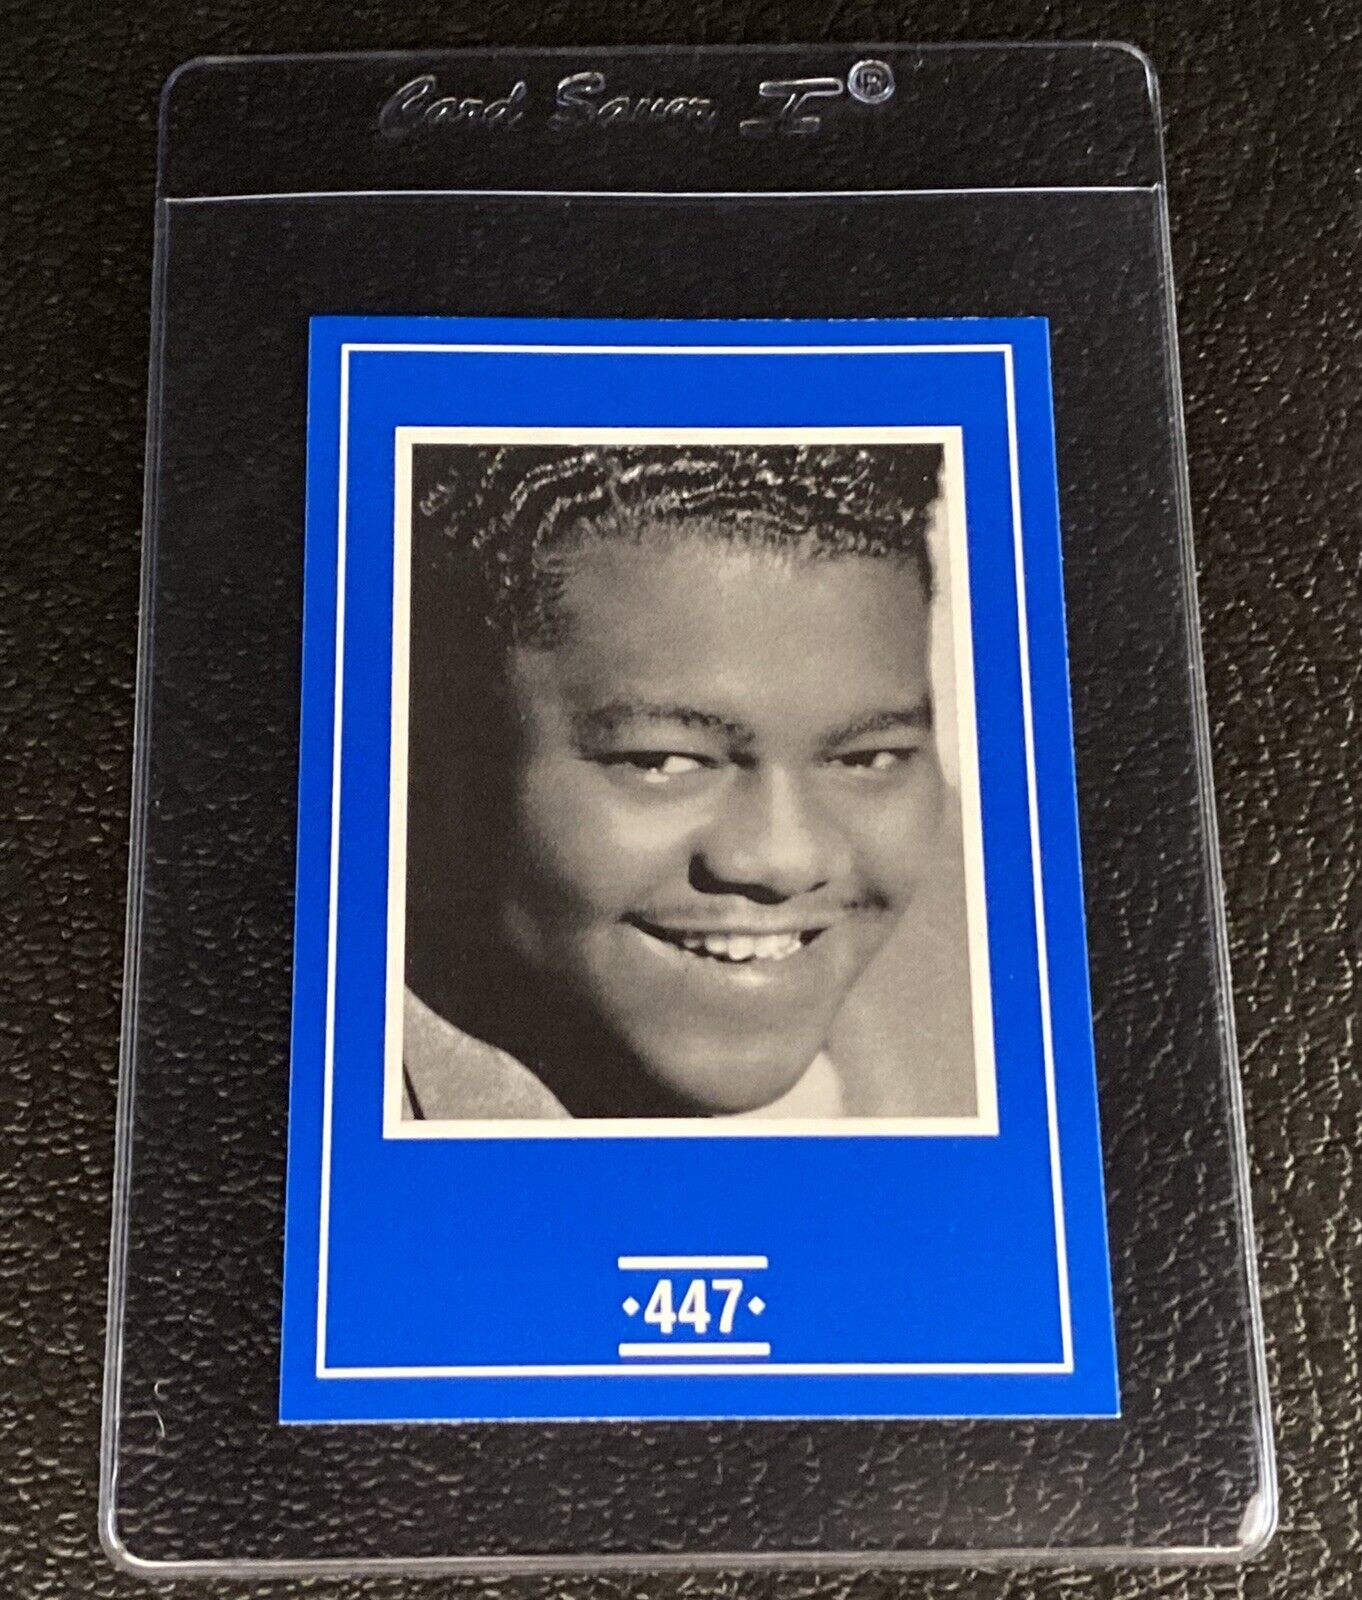 Fats Domino Card 1991 Face To Face Game Canada Games Rock And Roll Music Piano